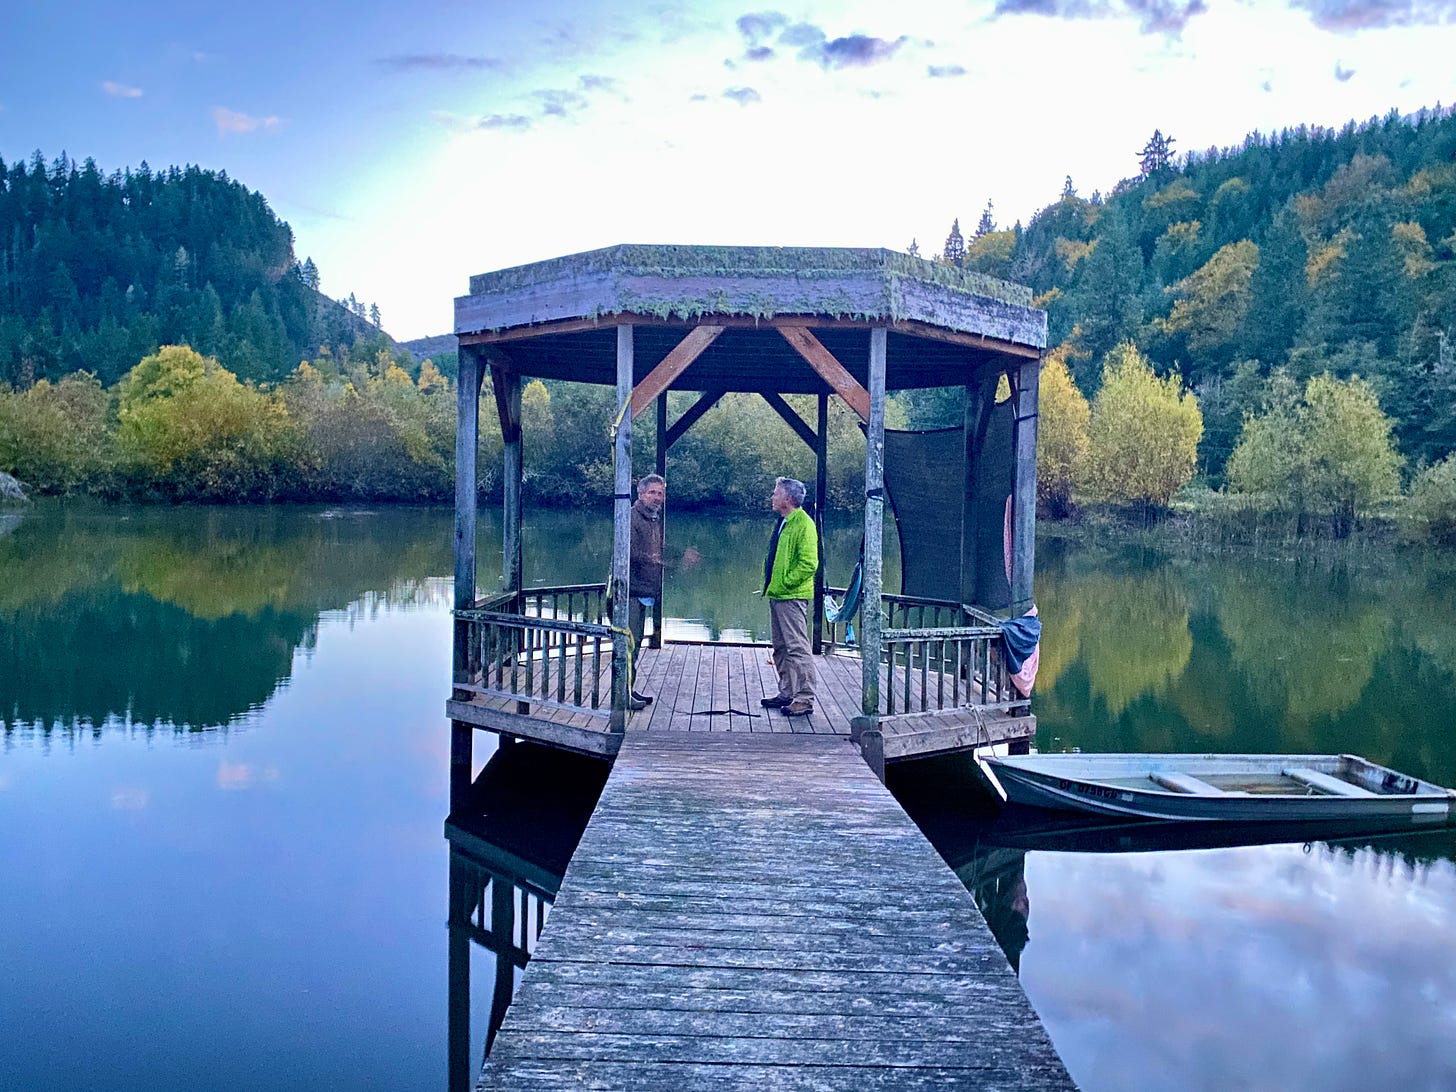 A wooden dock leads to a covered gazebo on a pond at sunset, with two men talking to each other in the gazebo.